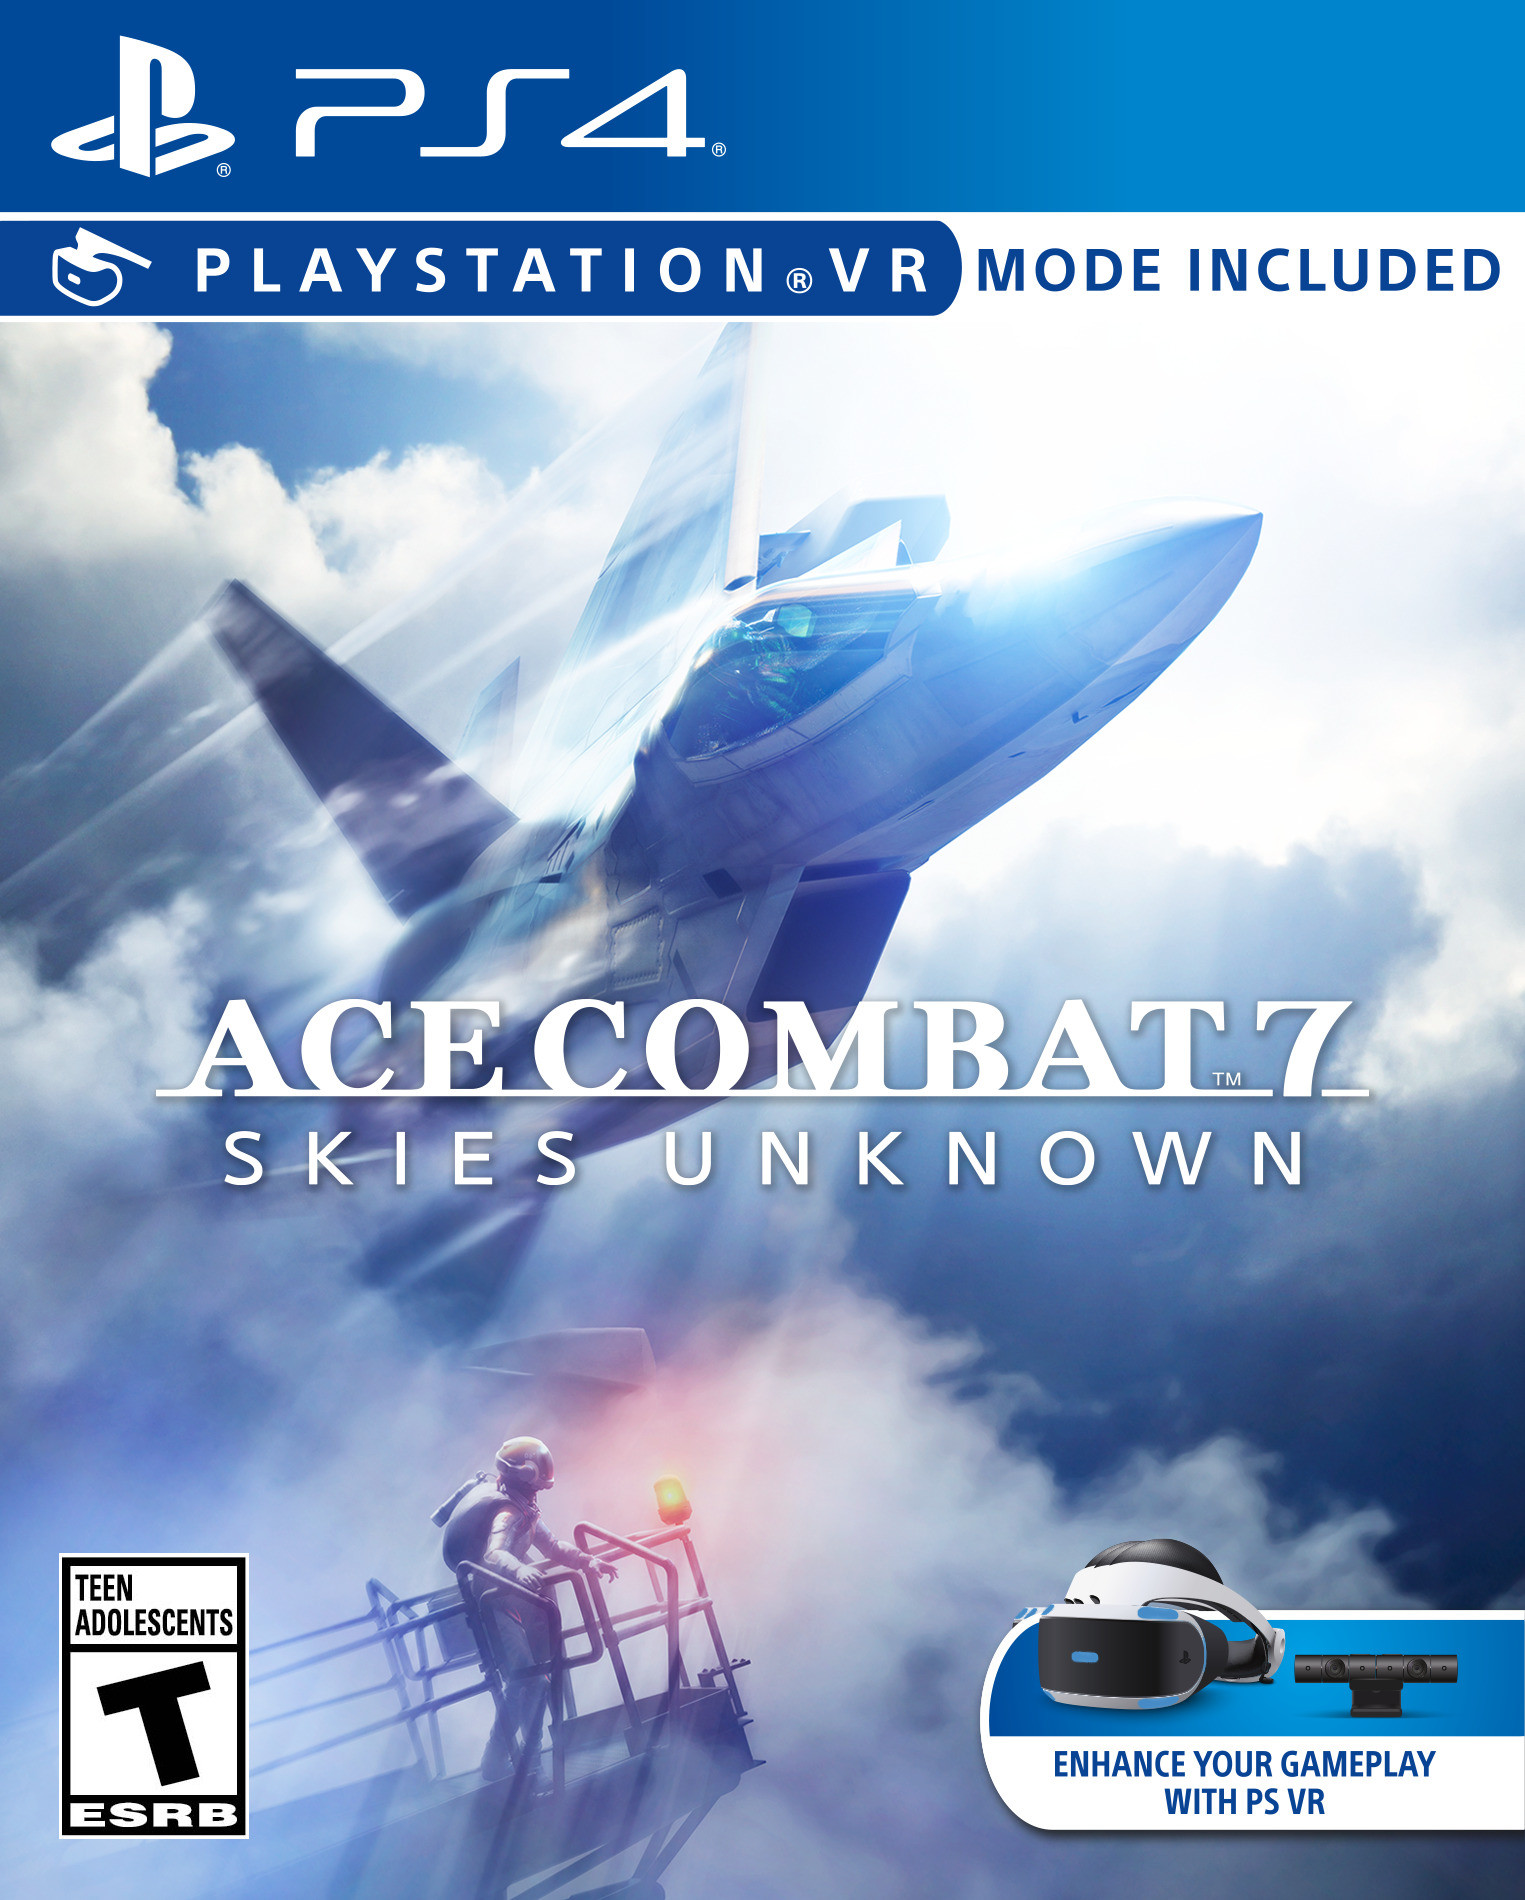 Ace Combat 7: Skies Unknown [PS4 VR] 5.05 / 6.72 / 7.02 [EUR] (2019) [Русский] (v1.00)